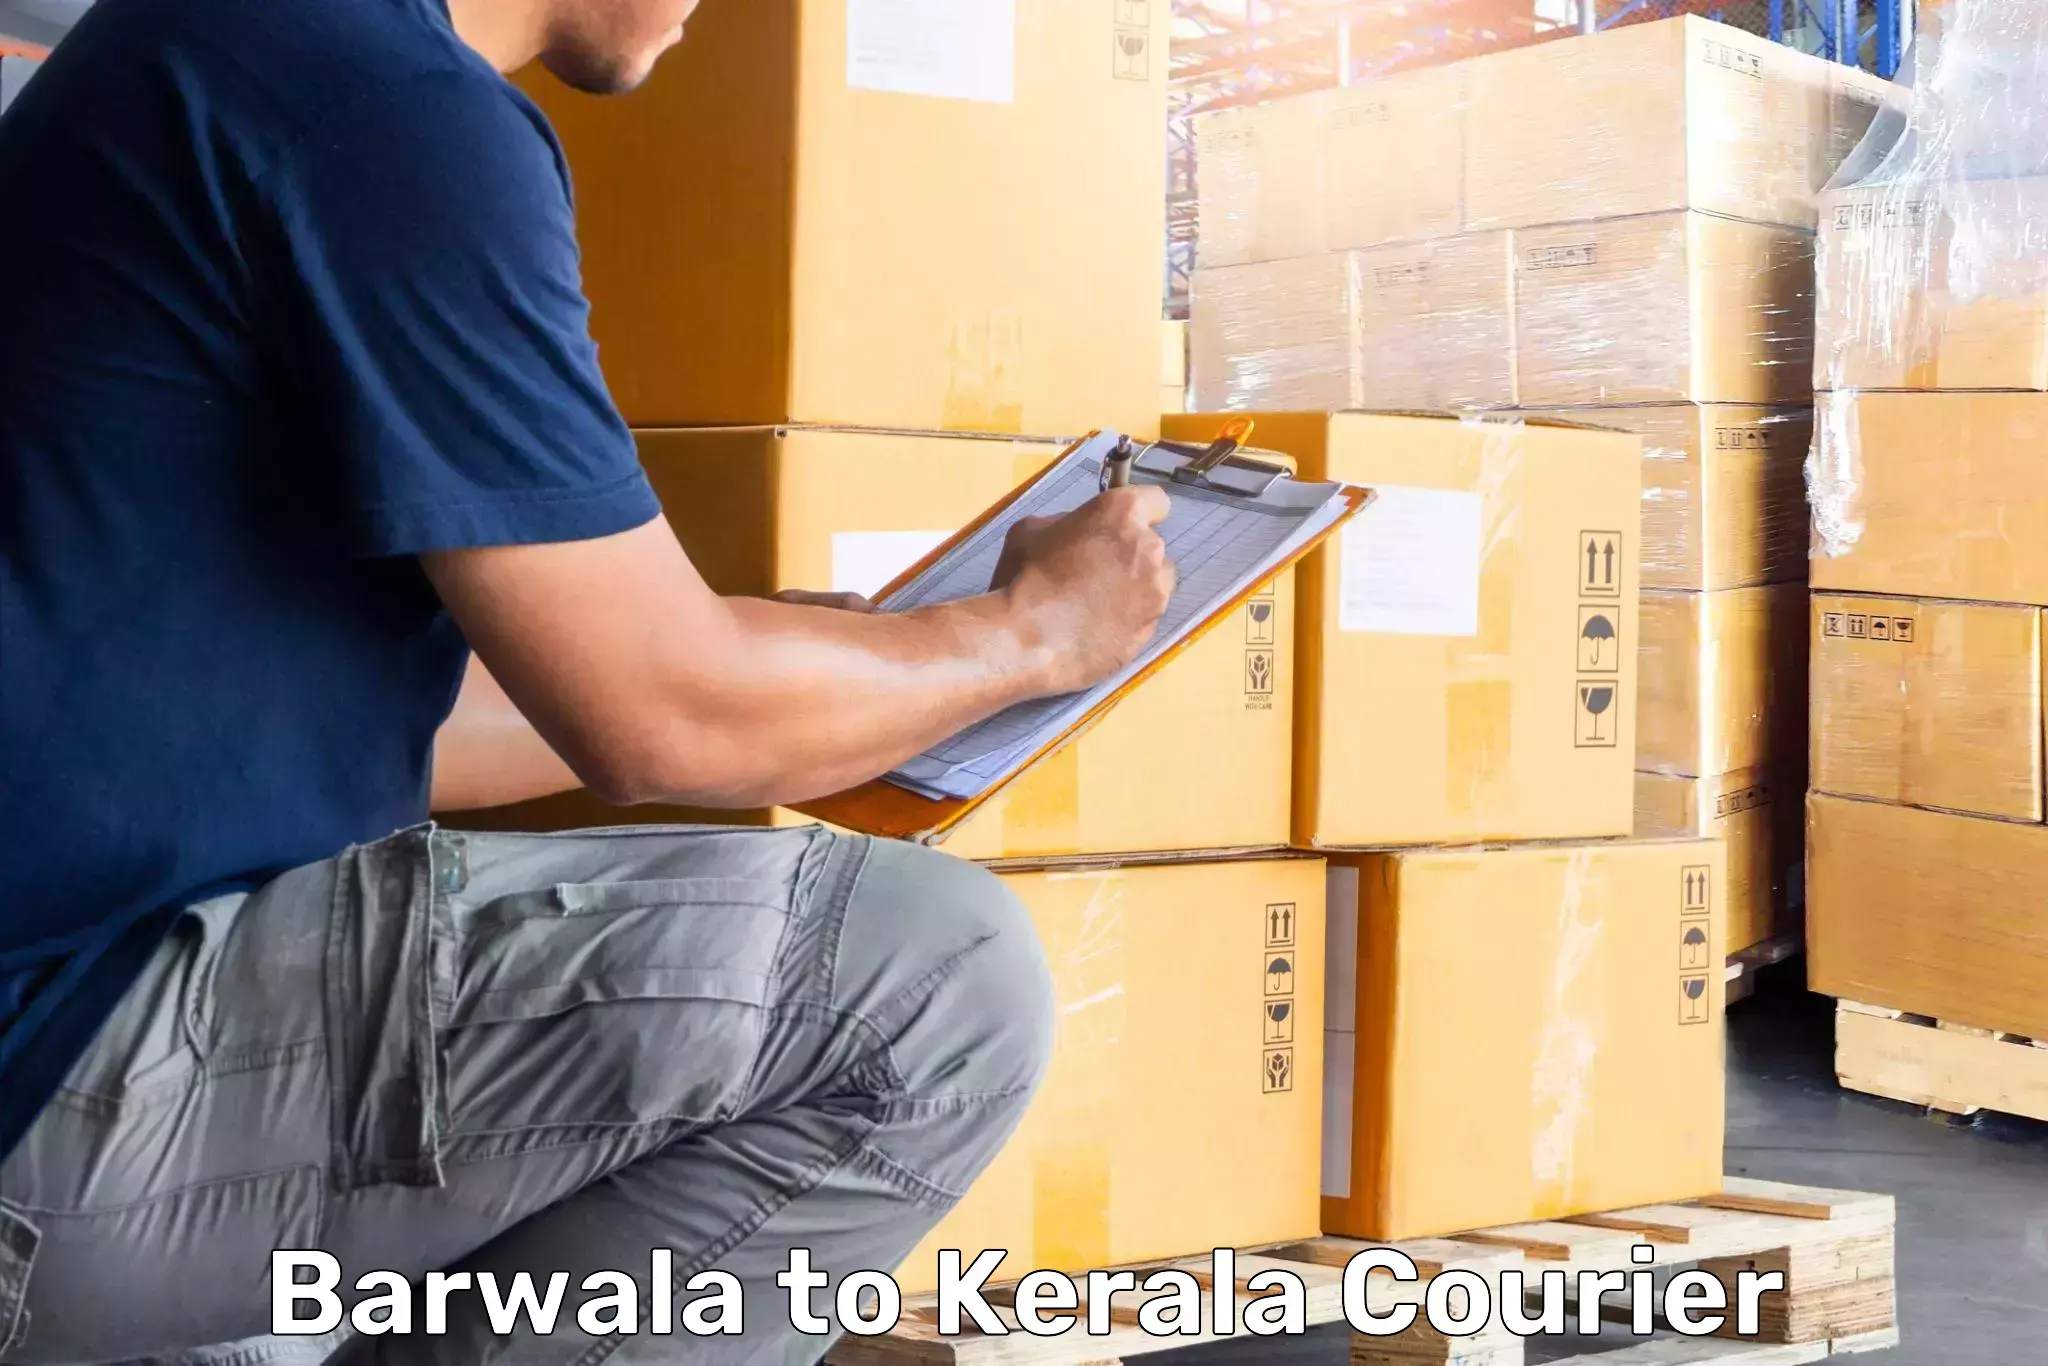 Instant baggage transport quote Barwala to Rajamudy